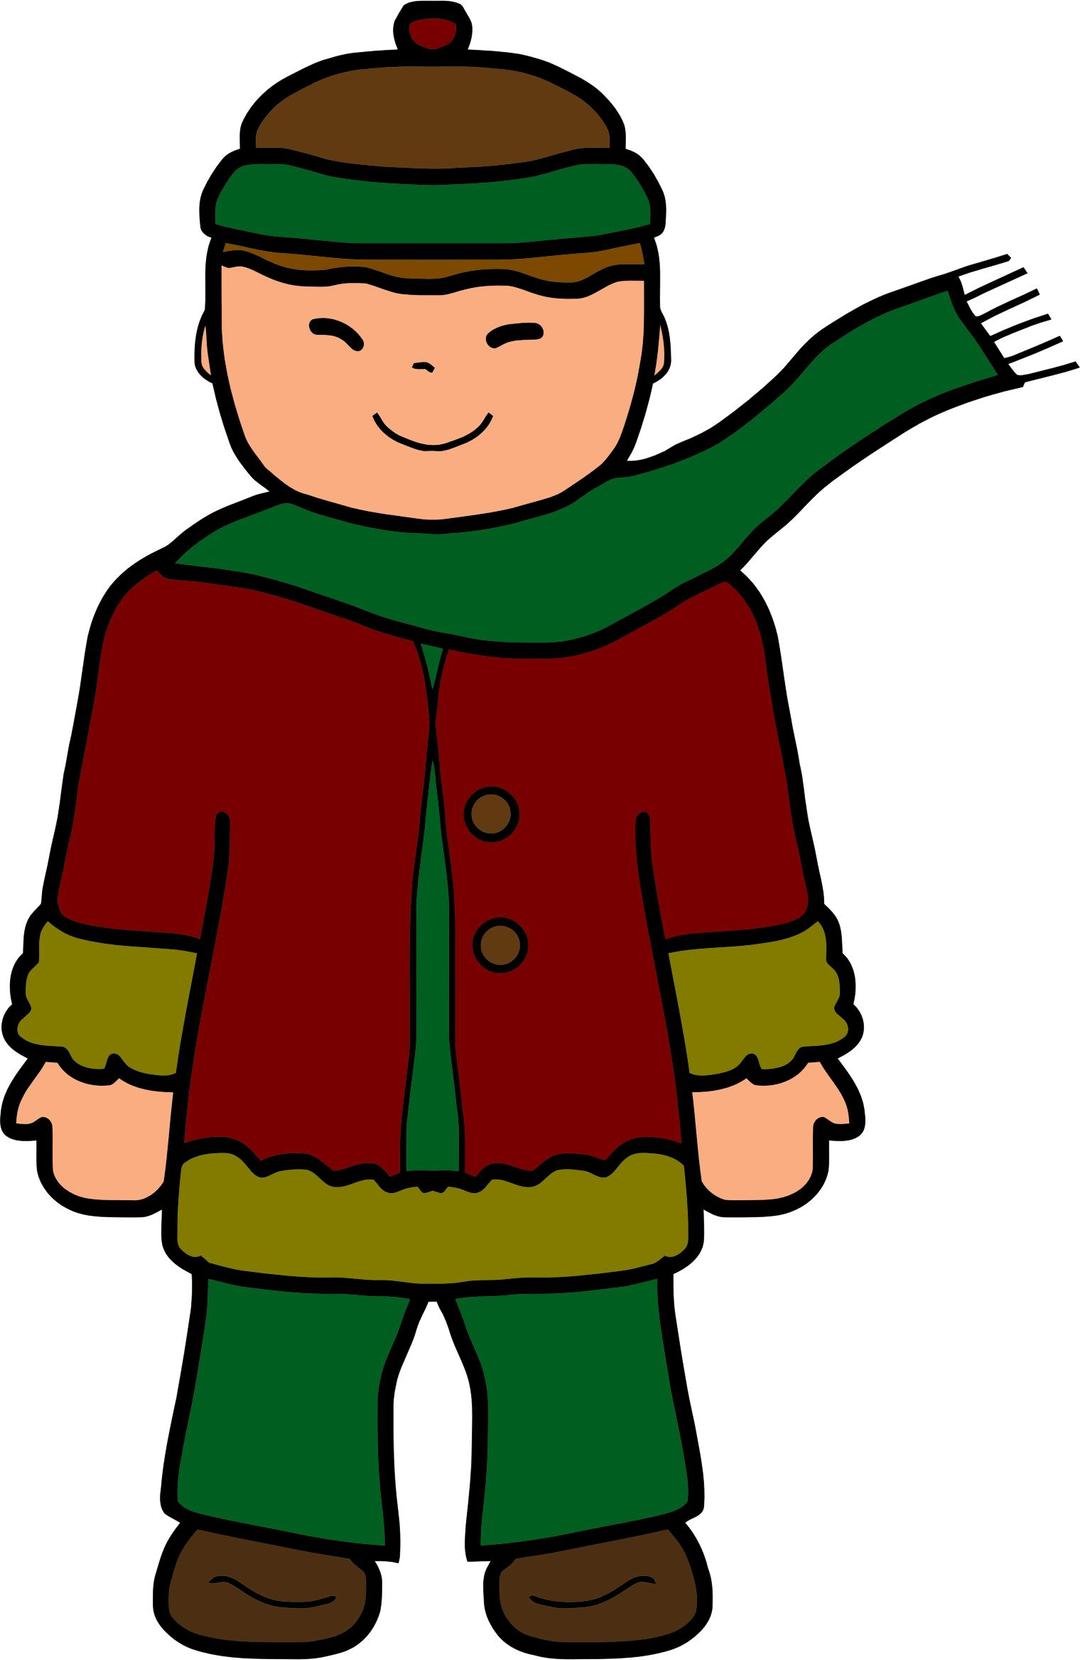 Boy In Winter Clothing png transparent